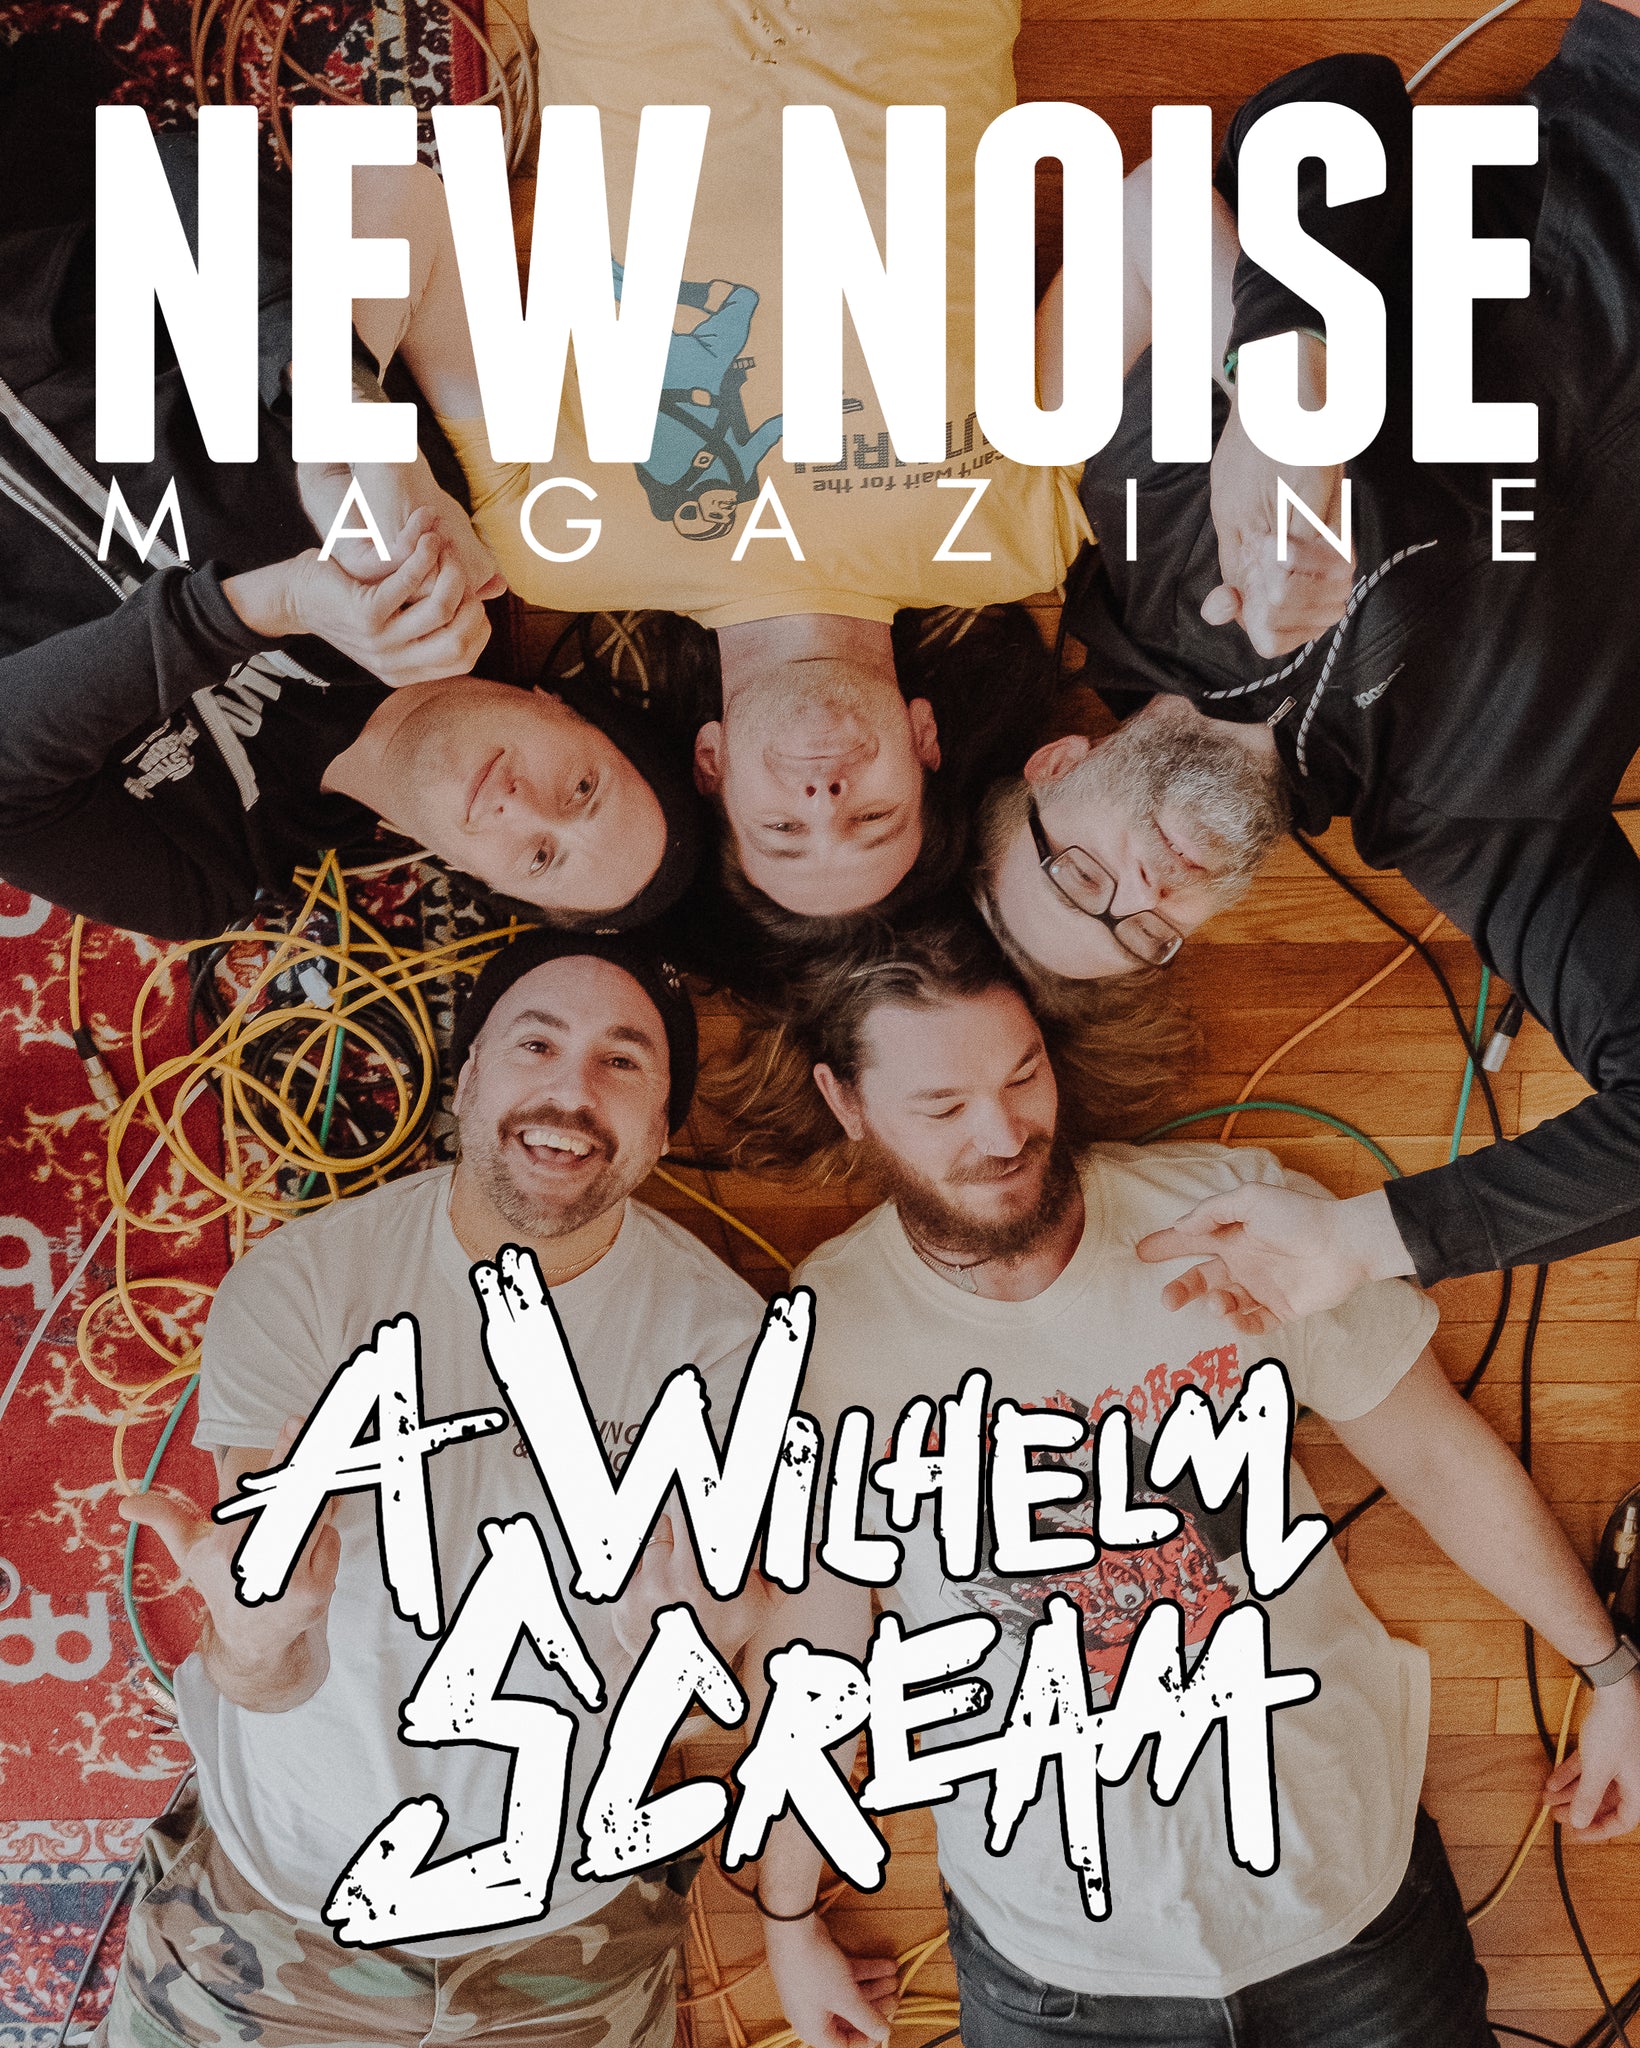 ISSUE 62 – COVER FT. A WILHELM SCREAM